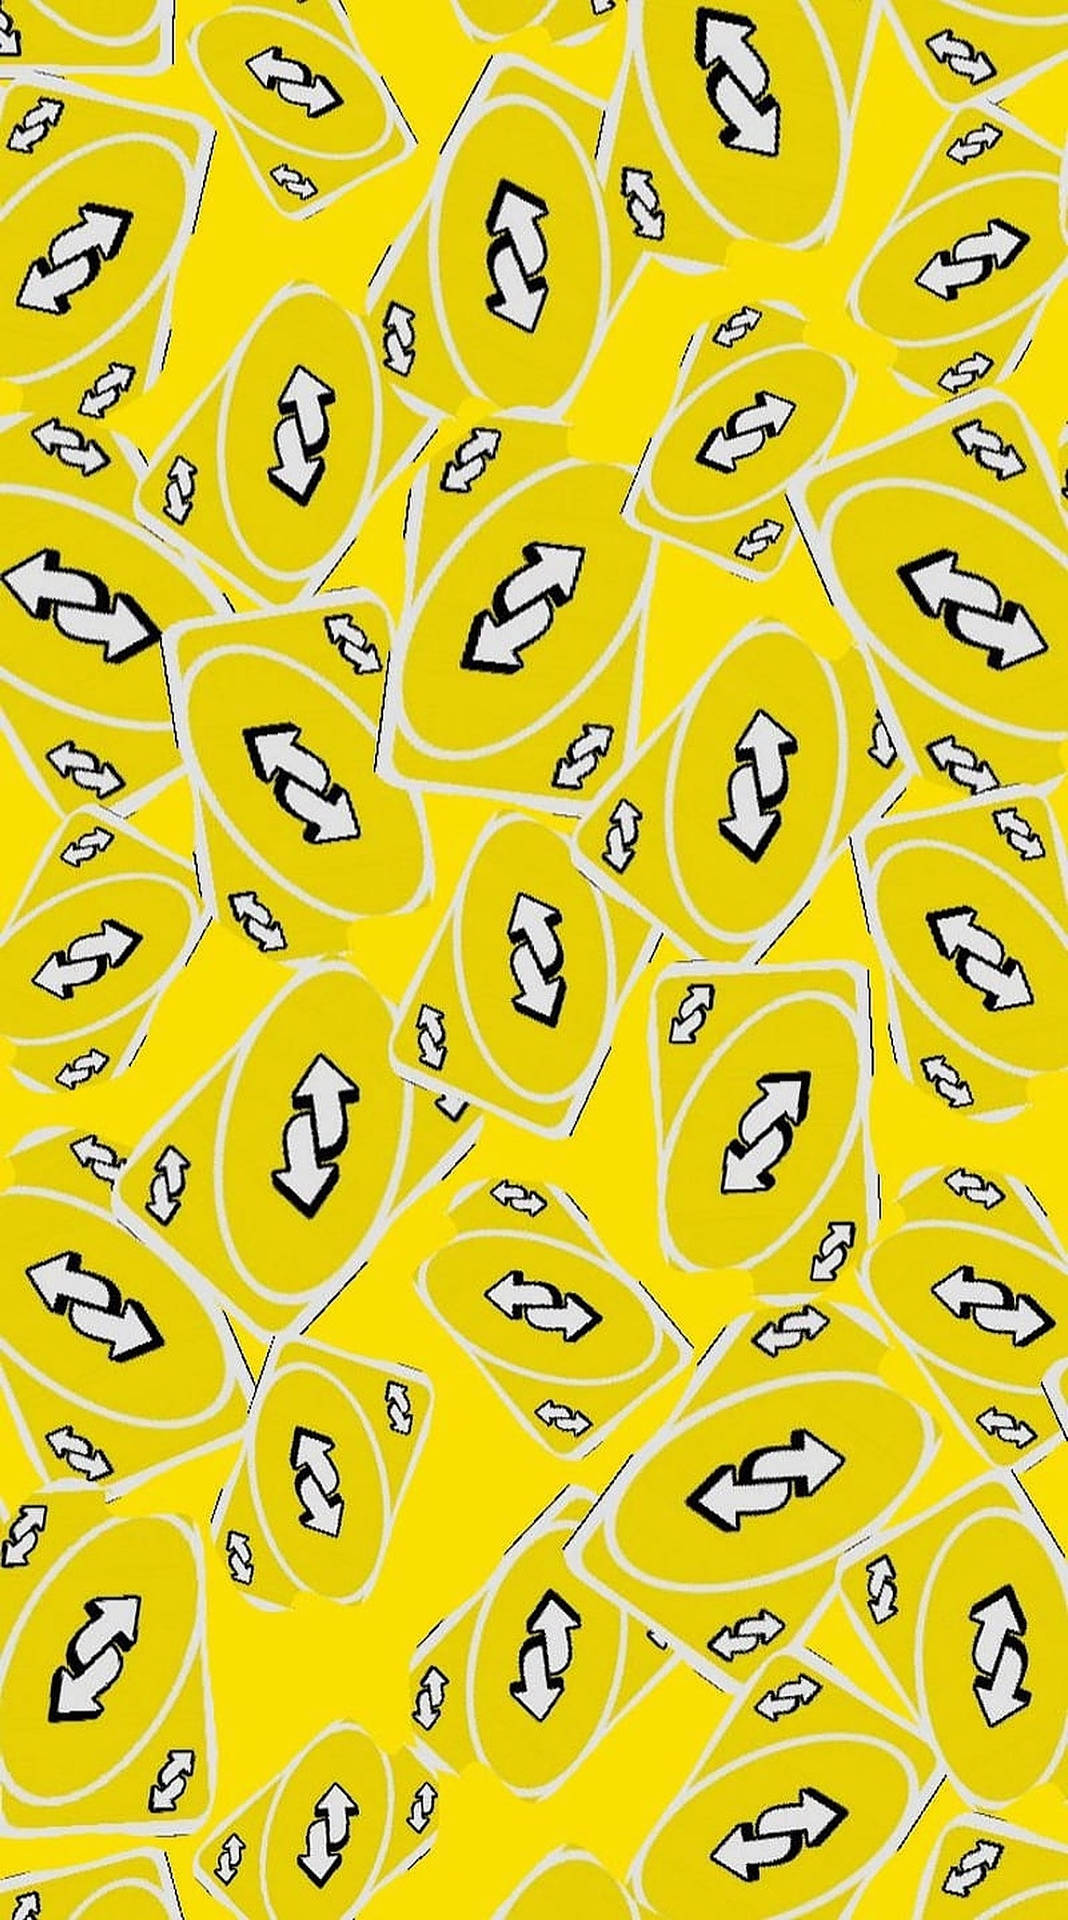 A Bright Yellow Reverse Uno Card Background